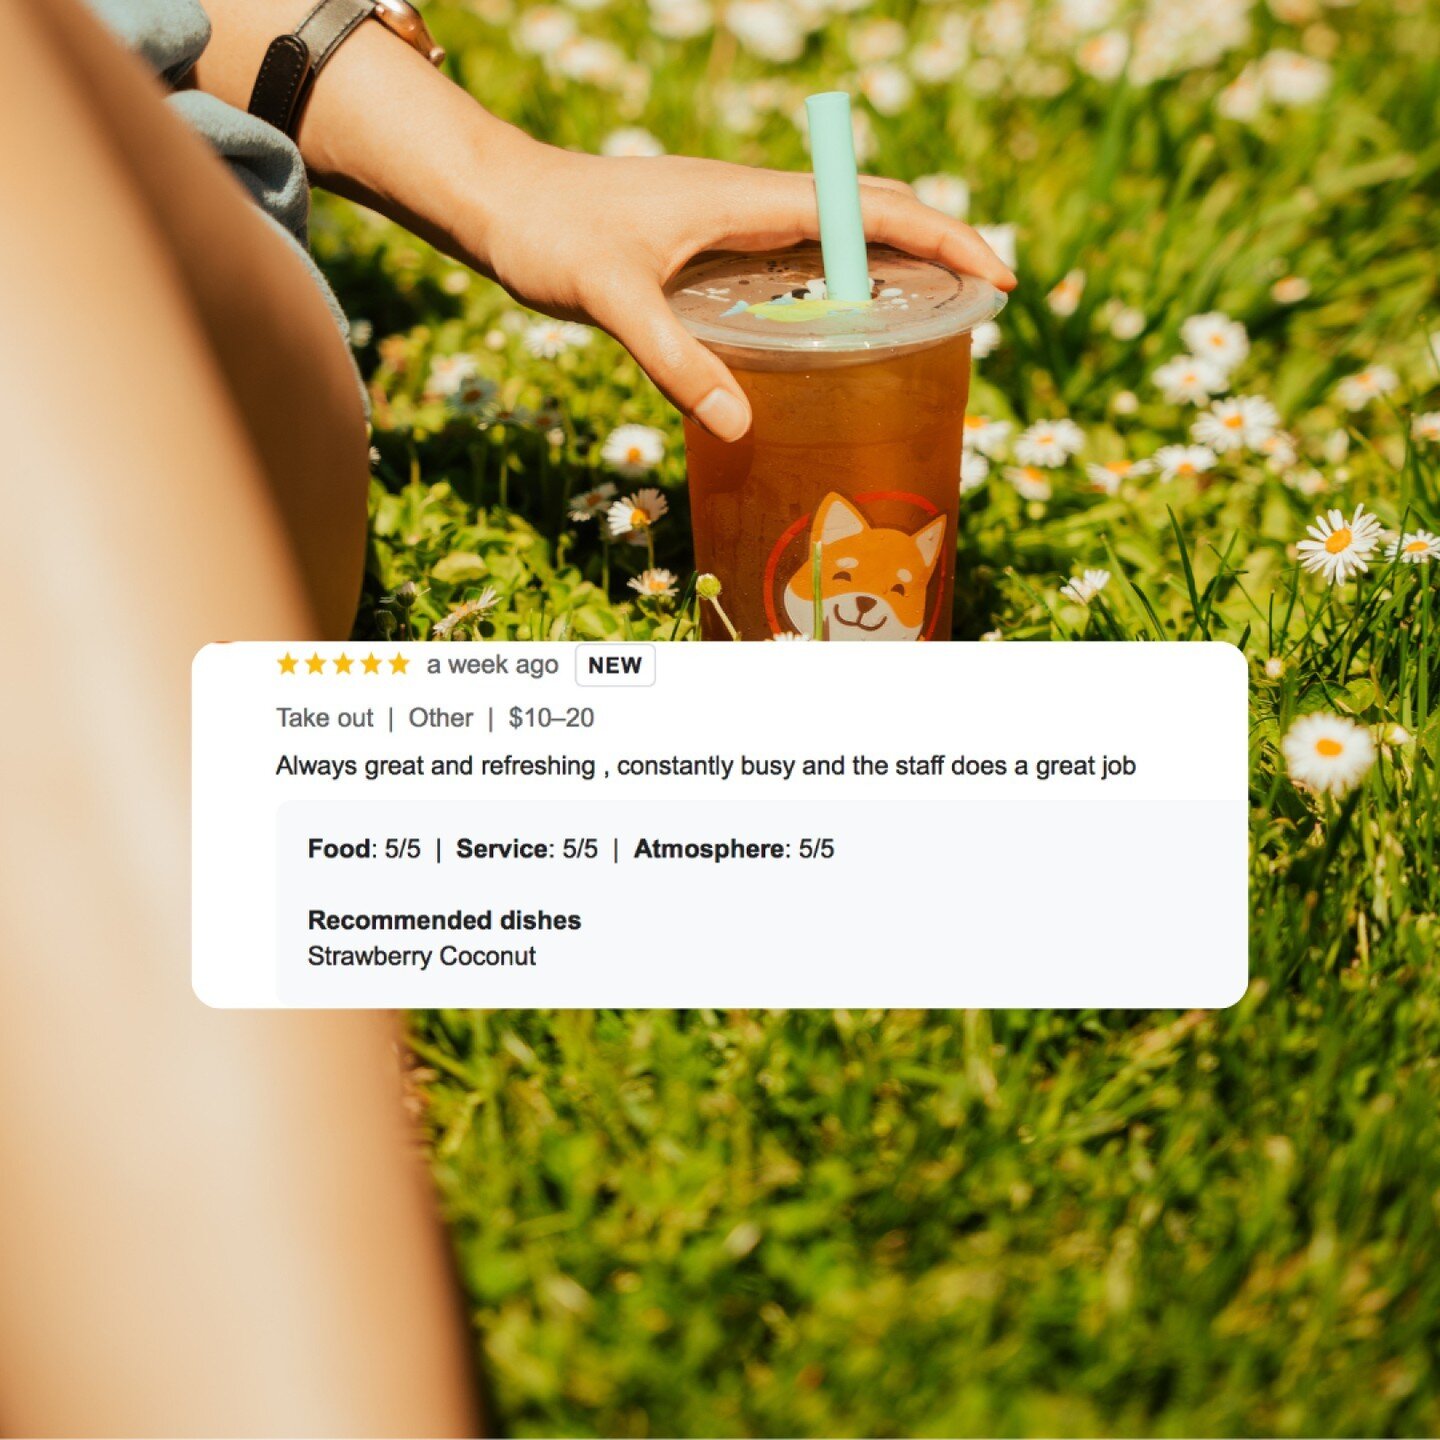 We have been feeling the love Pochi Fam!!💌

Big 🌟THANK YOU🌟  to all of you who share your experience with us. We hope that we always brighten your day, even if it's just a little! &lt;3

.
.
.
#bubbletea #boba #marysvillewa #pochibubbletea #bubble